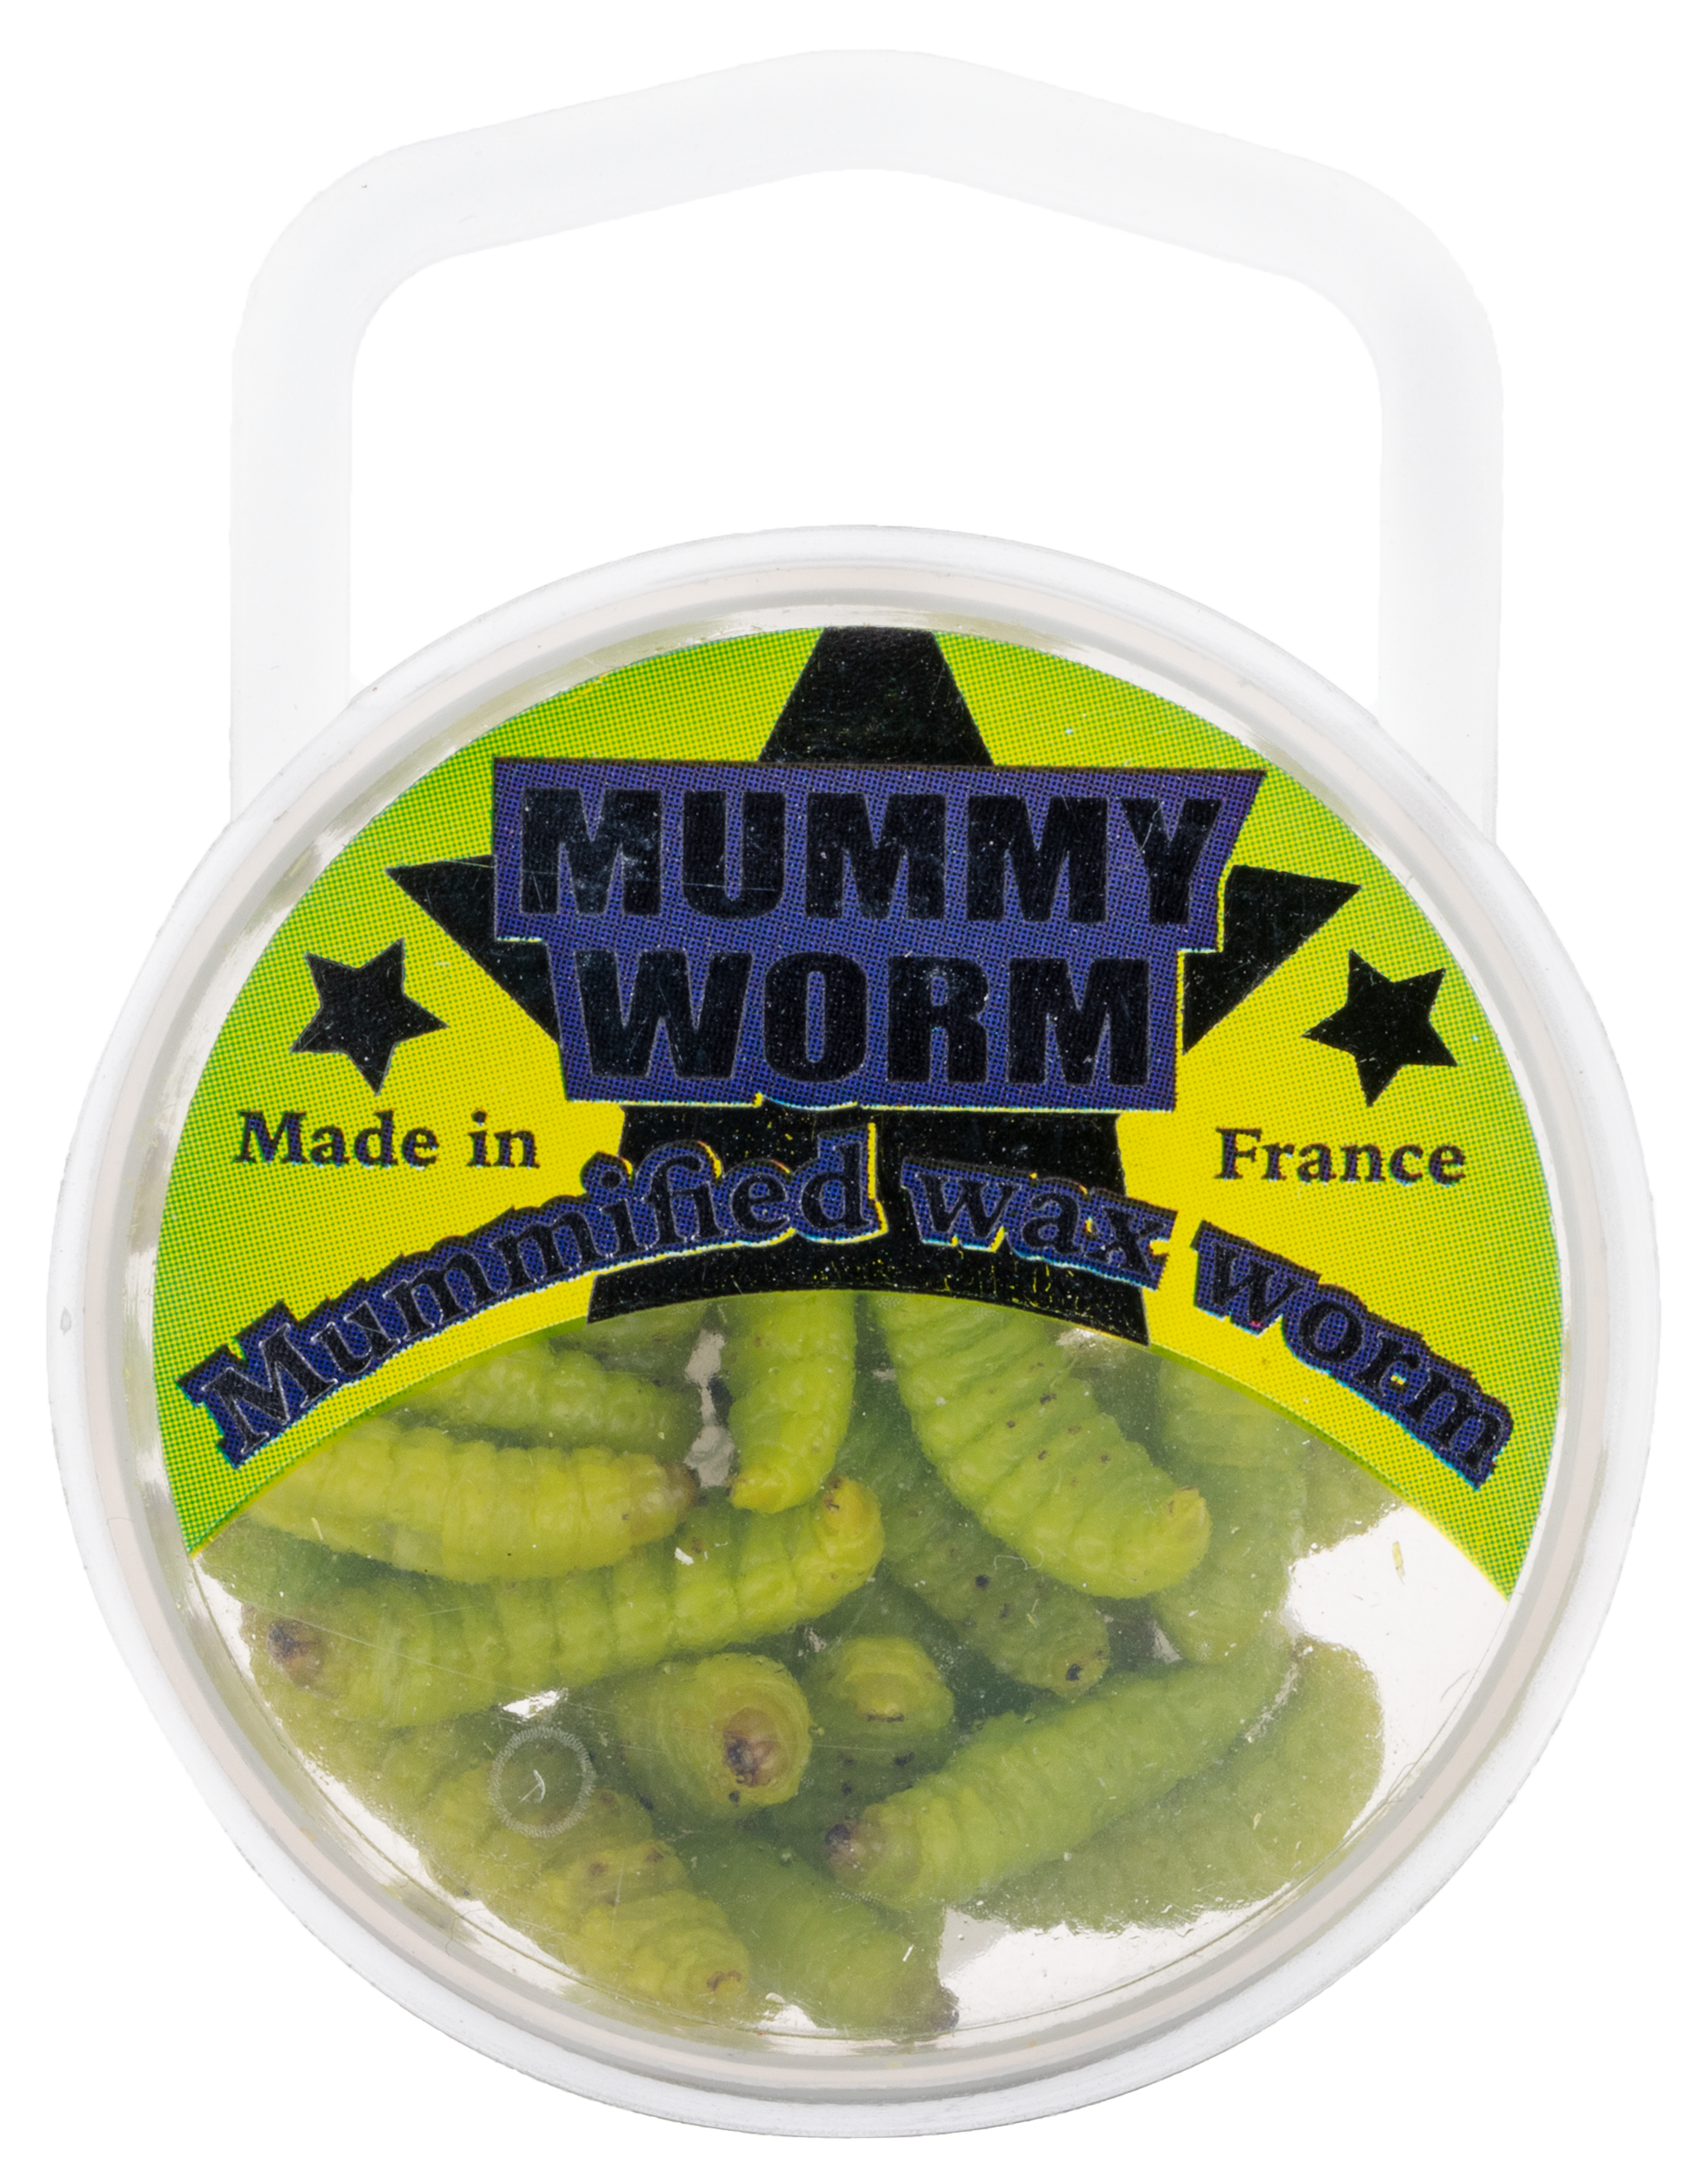 EuroTackle Mummy Worm Preserved Wax Worms